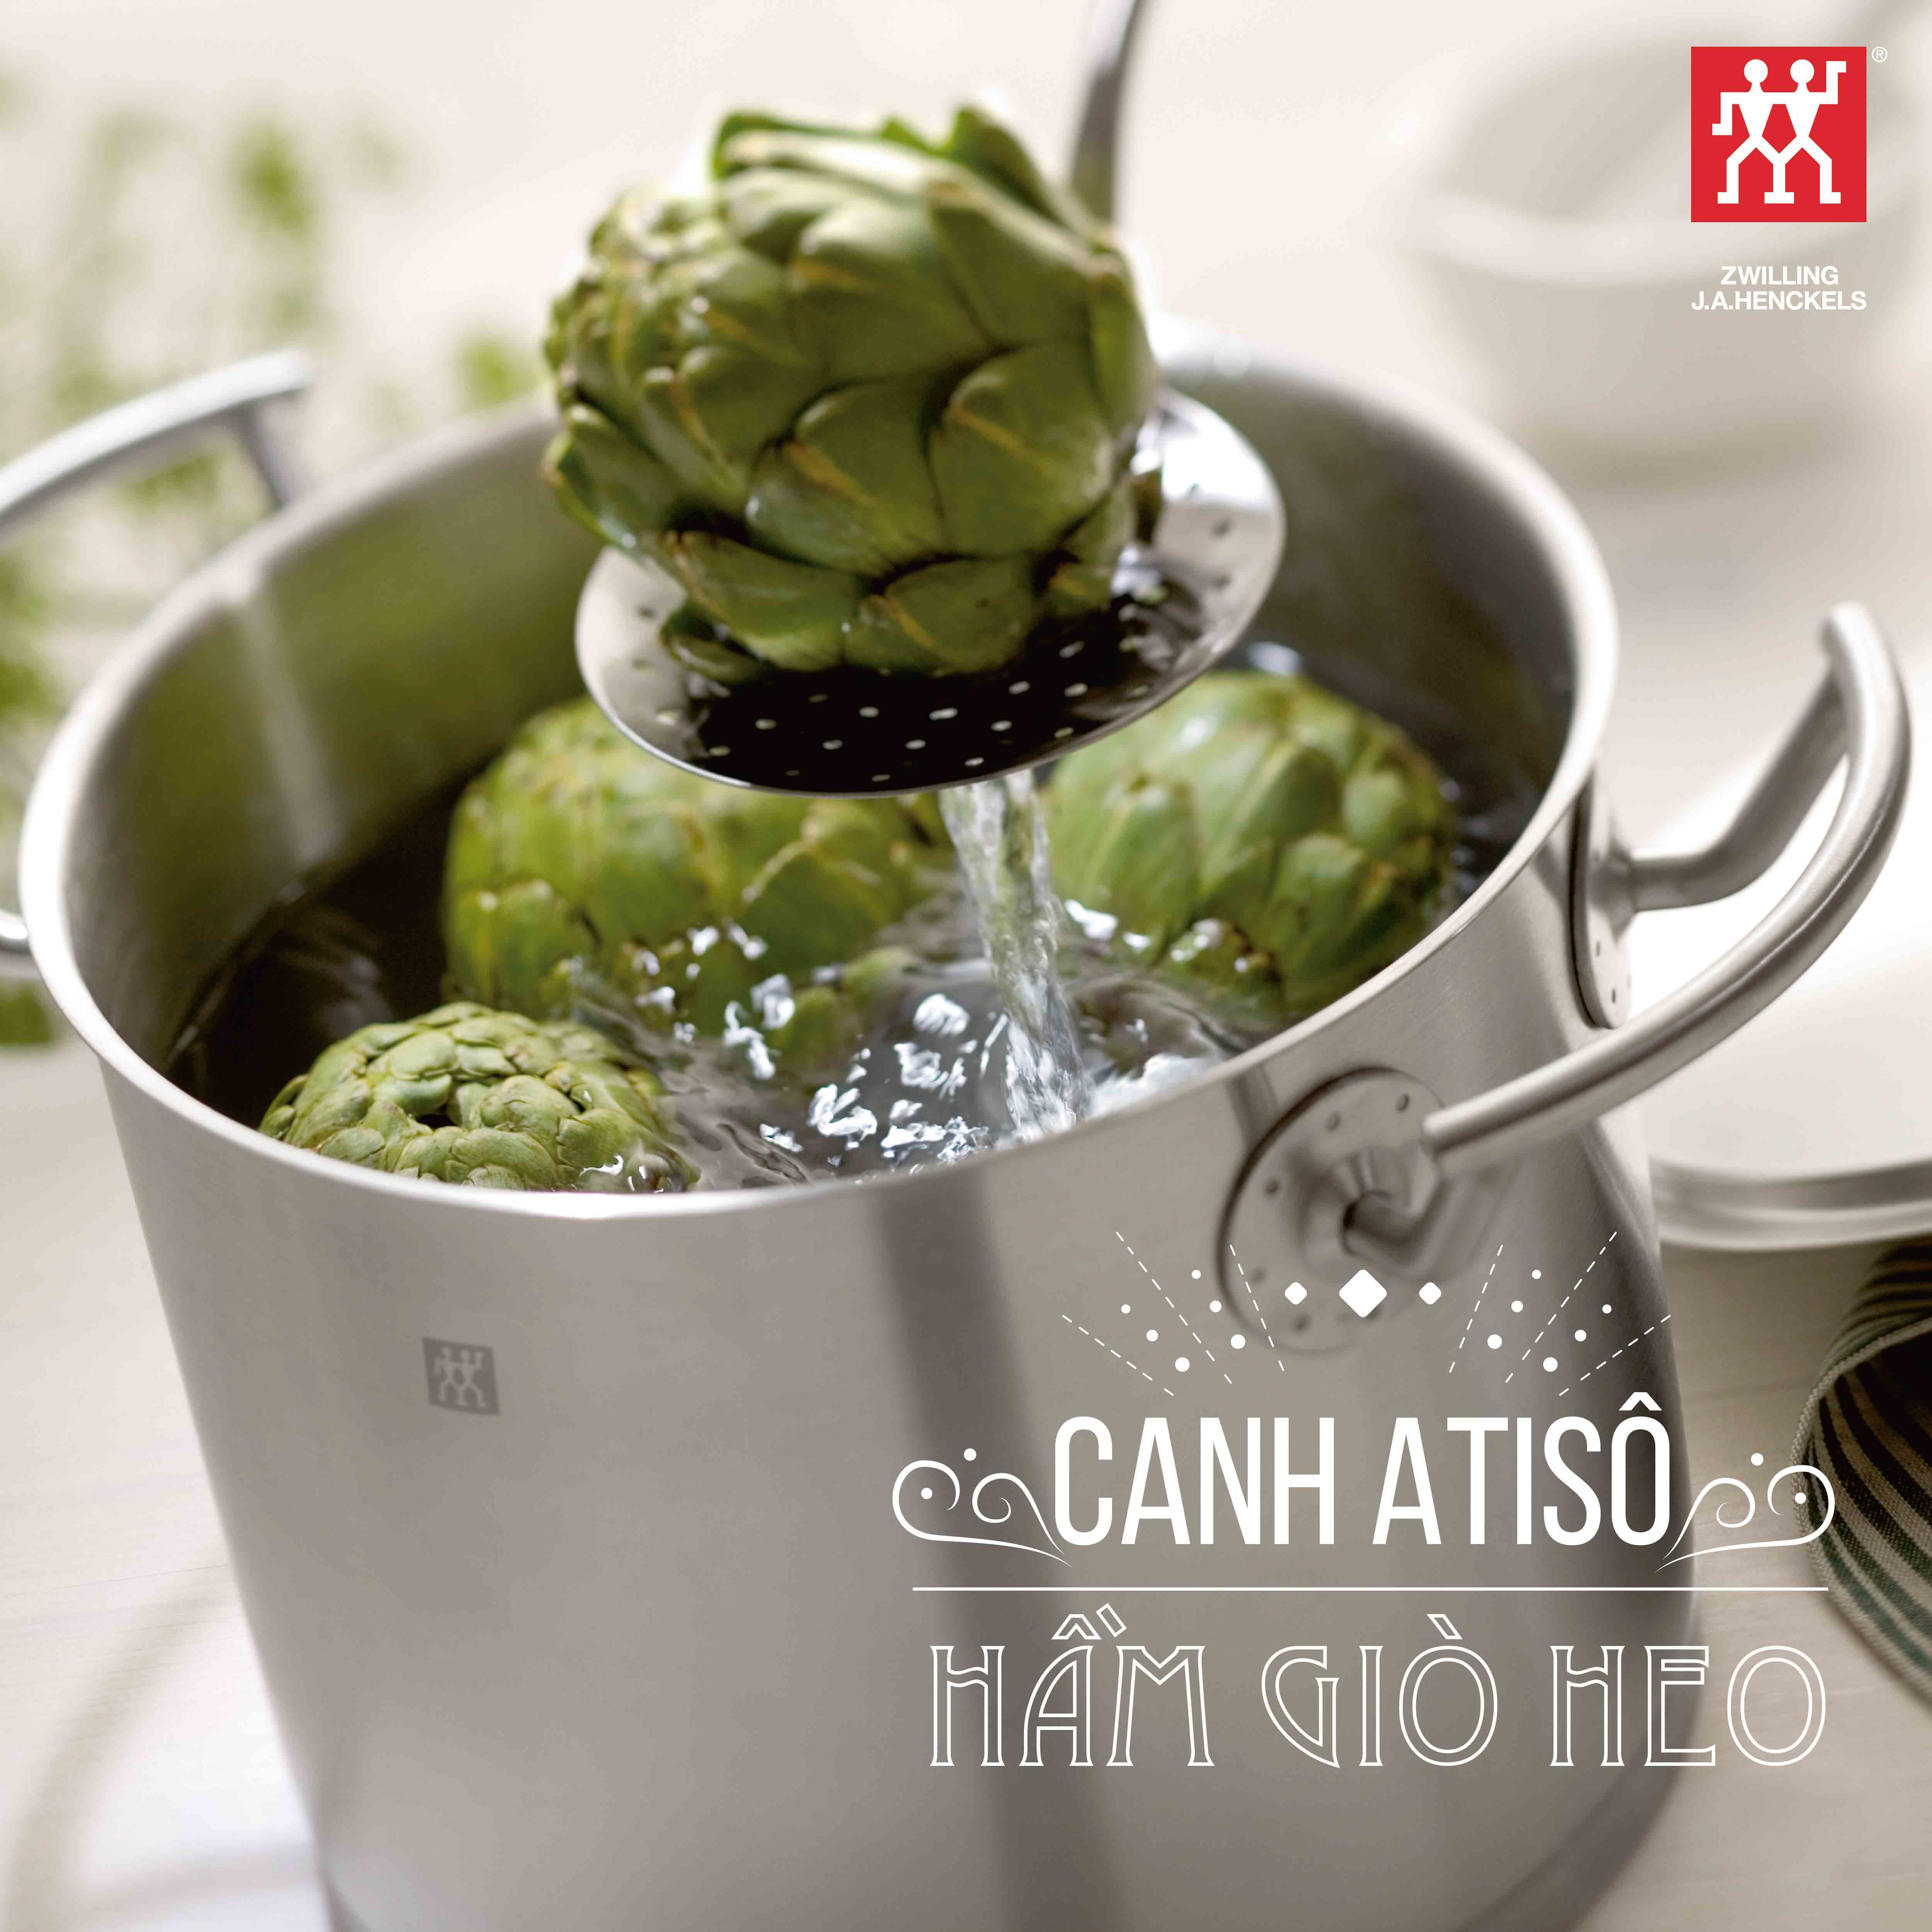 Canh Atiso hầm giò heo